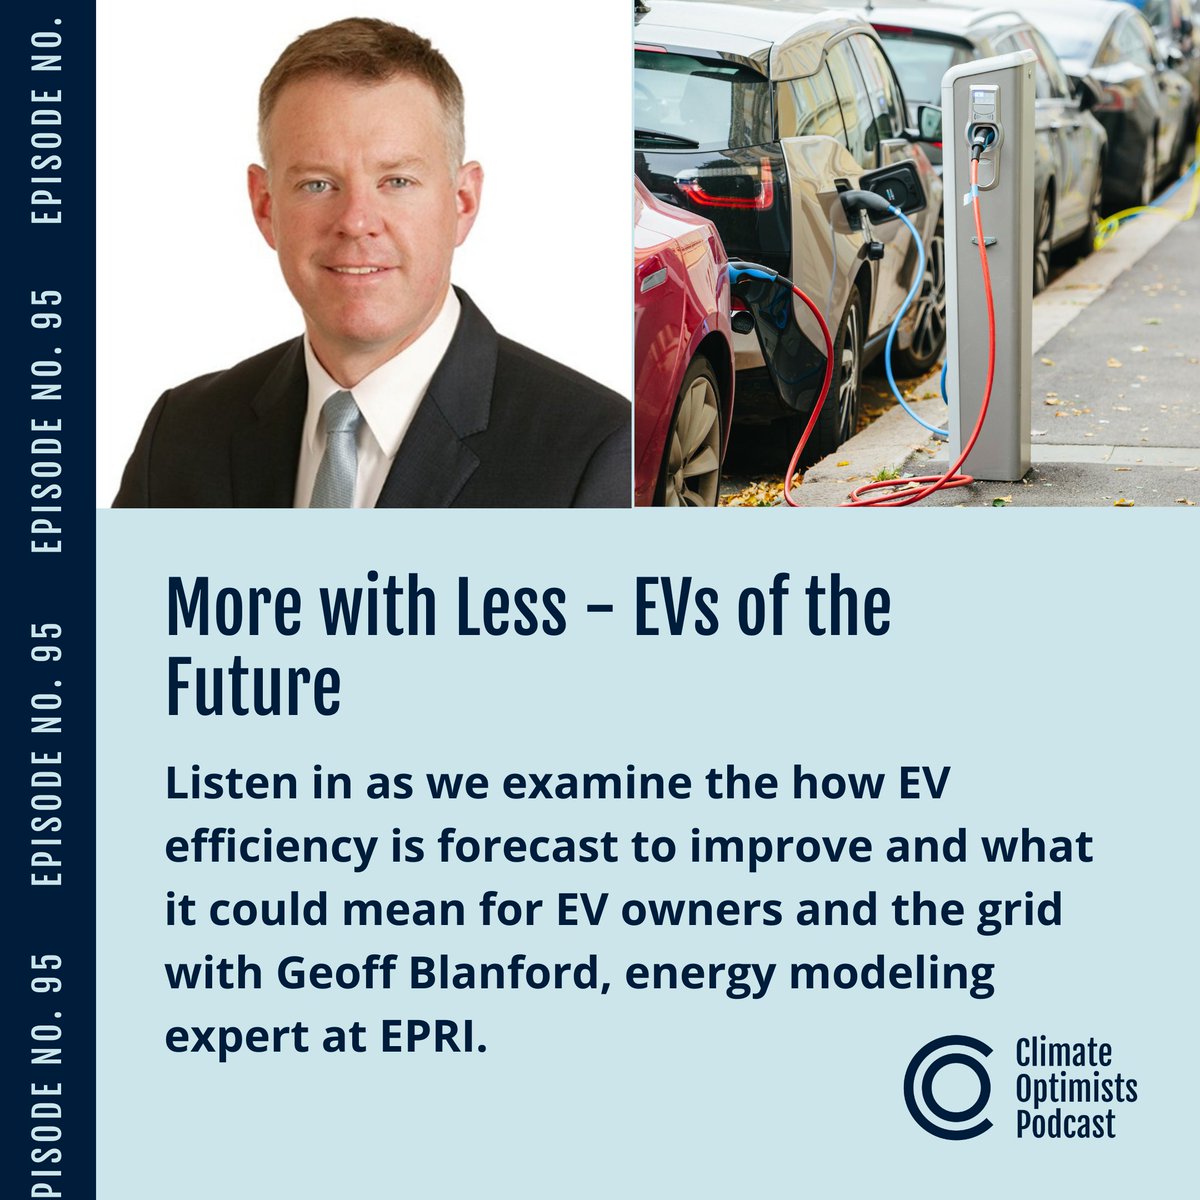 Episode 95 is out now! Listen in to hear more about the future of the EV industry! #climateoptimists #climatechange #electricvehicles #happy #podcast #EPRI